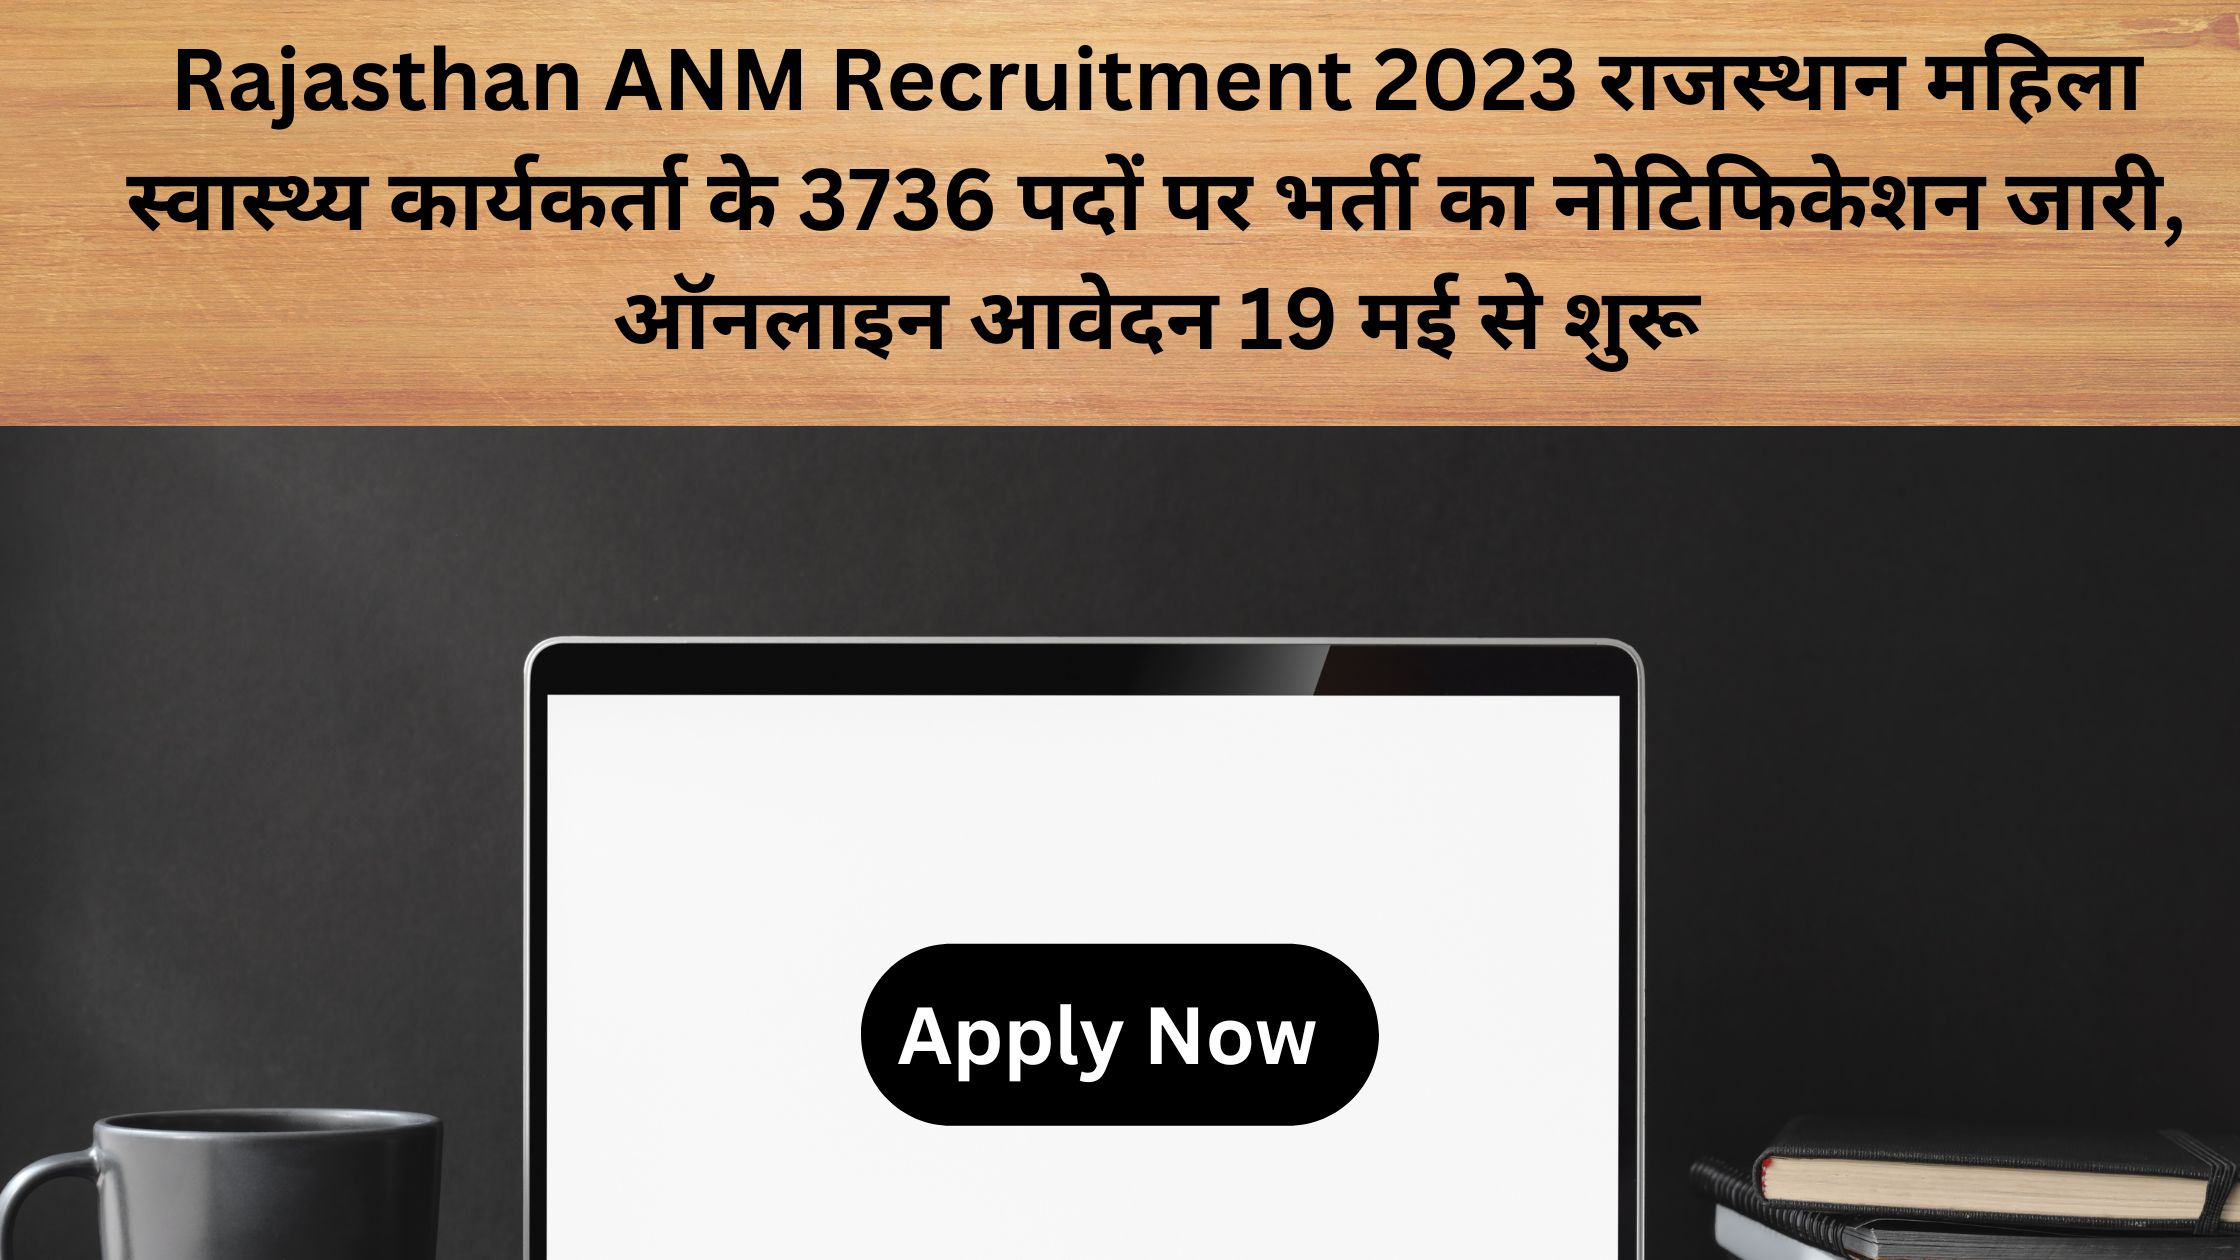 Rajasthan ANM Recruitment 2023 Apply Now